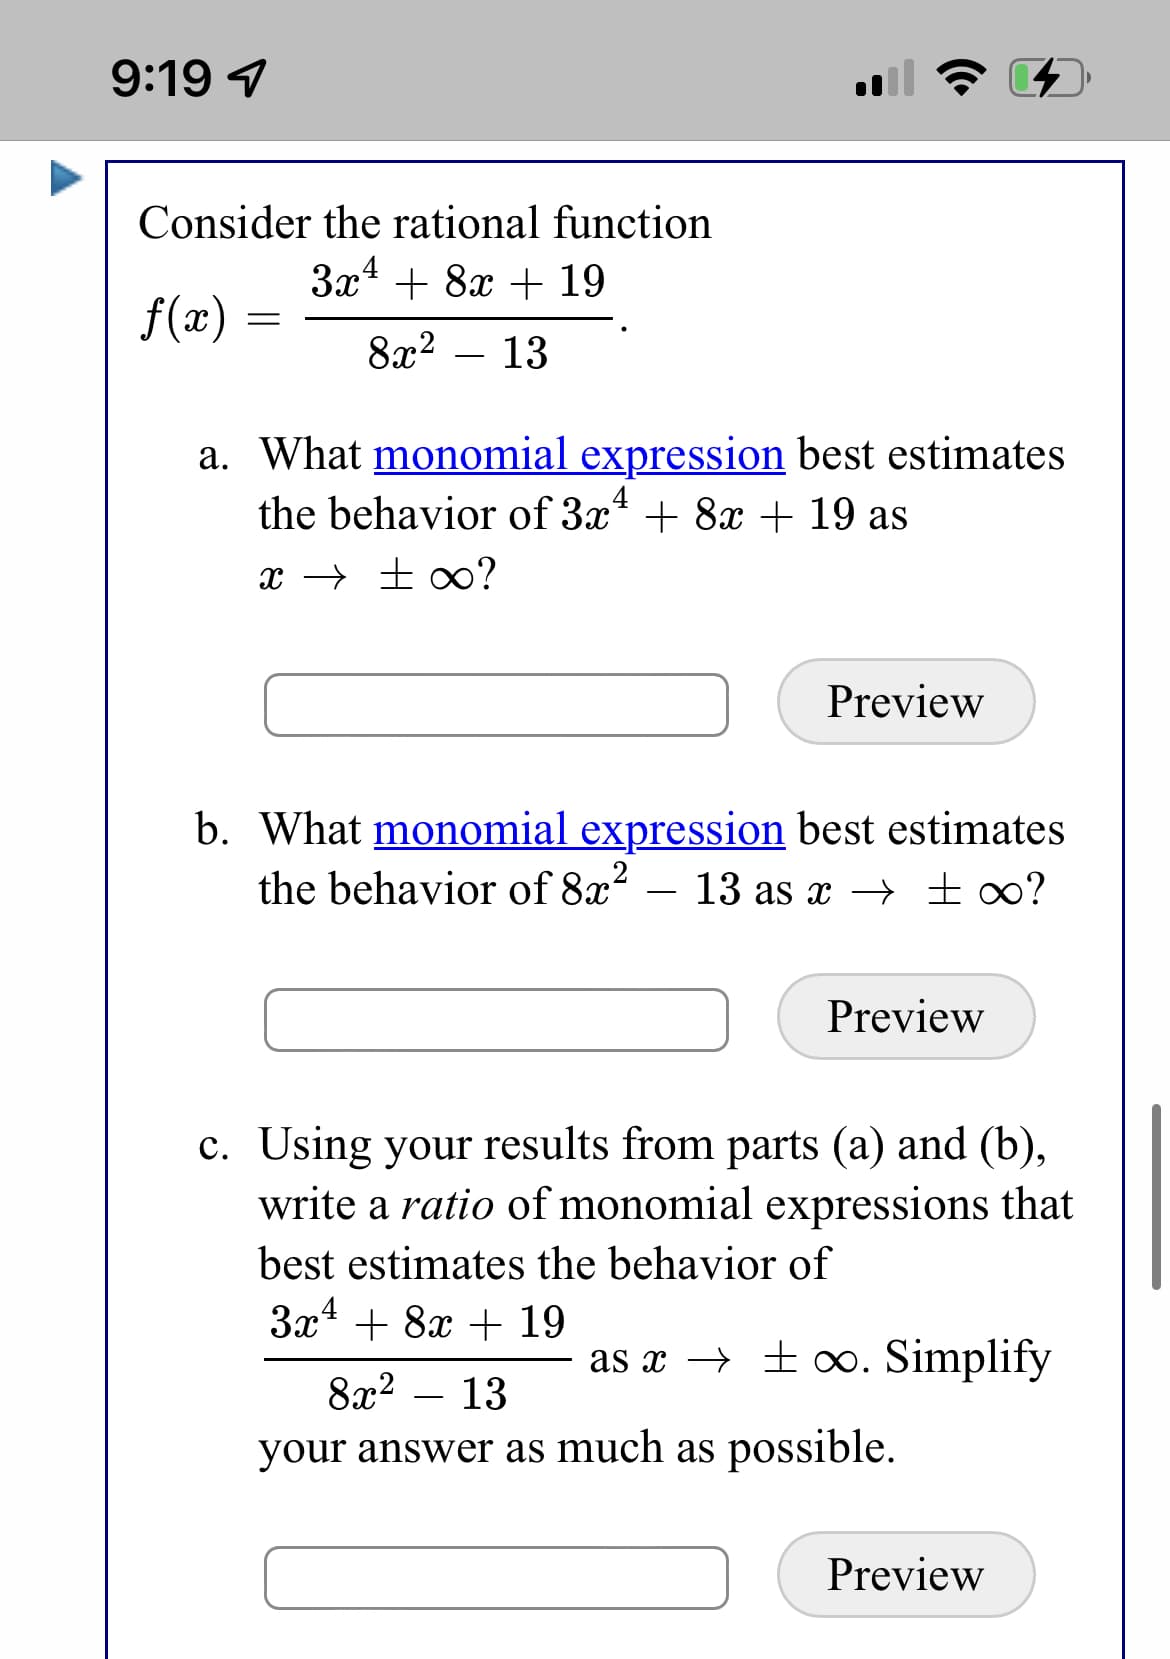 9:19 7
Consider the rational function
За^ + 8х + 19
f(x) :
8г? — 13
a. What monomial expression best estimates
the behavior of 3x* + 8x + 19 as
x → ± ∞?
Preview
b. What monomial expression best estimates
the behavior of 8x?
13 as x → ±∞?
-
Preview
c. Using your results from parts (a) and (b),
write a ratio of monomial expressions that
best estimates the behavior of
3x* + 8x + 19
as x → ± o. Simplify
8x2 – 13
-
your answer as much as possible.
Preview
